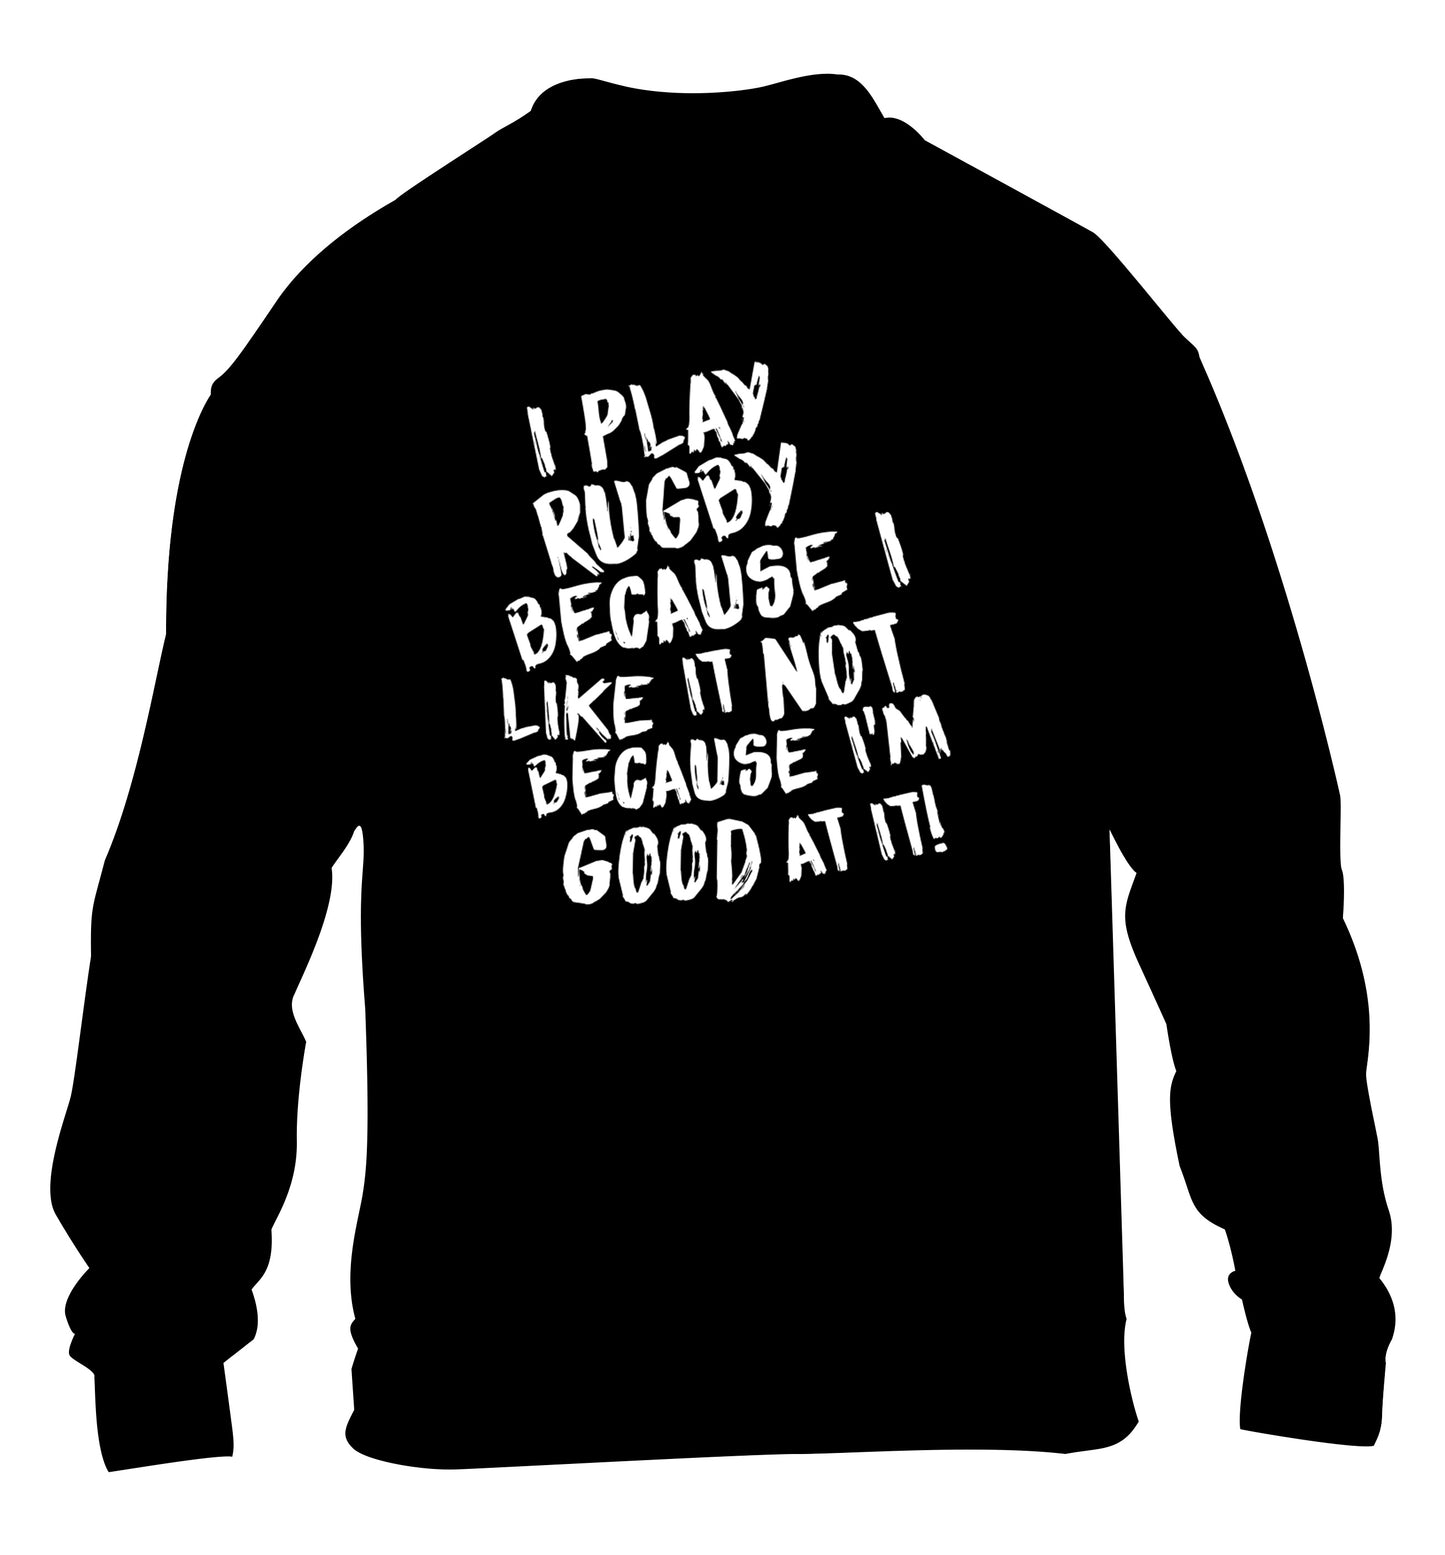 I play rugby because I like it not because I'm good at it children's black sweater 12-13 Years